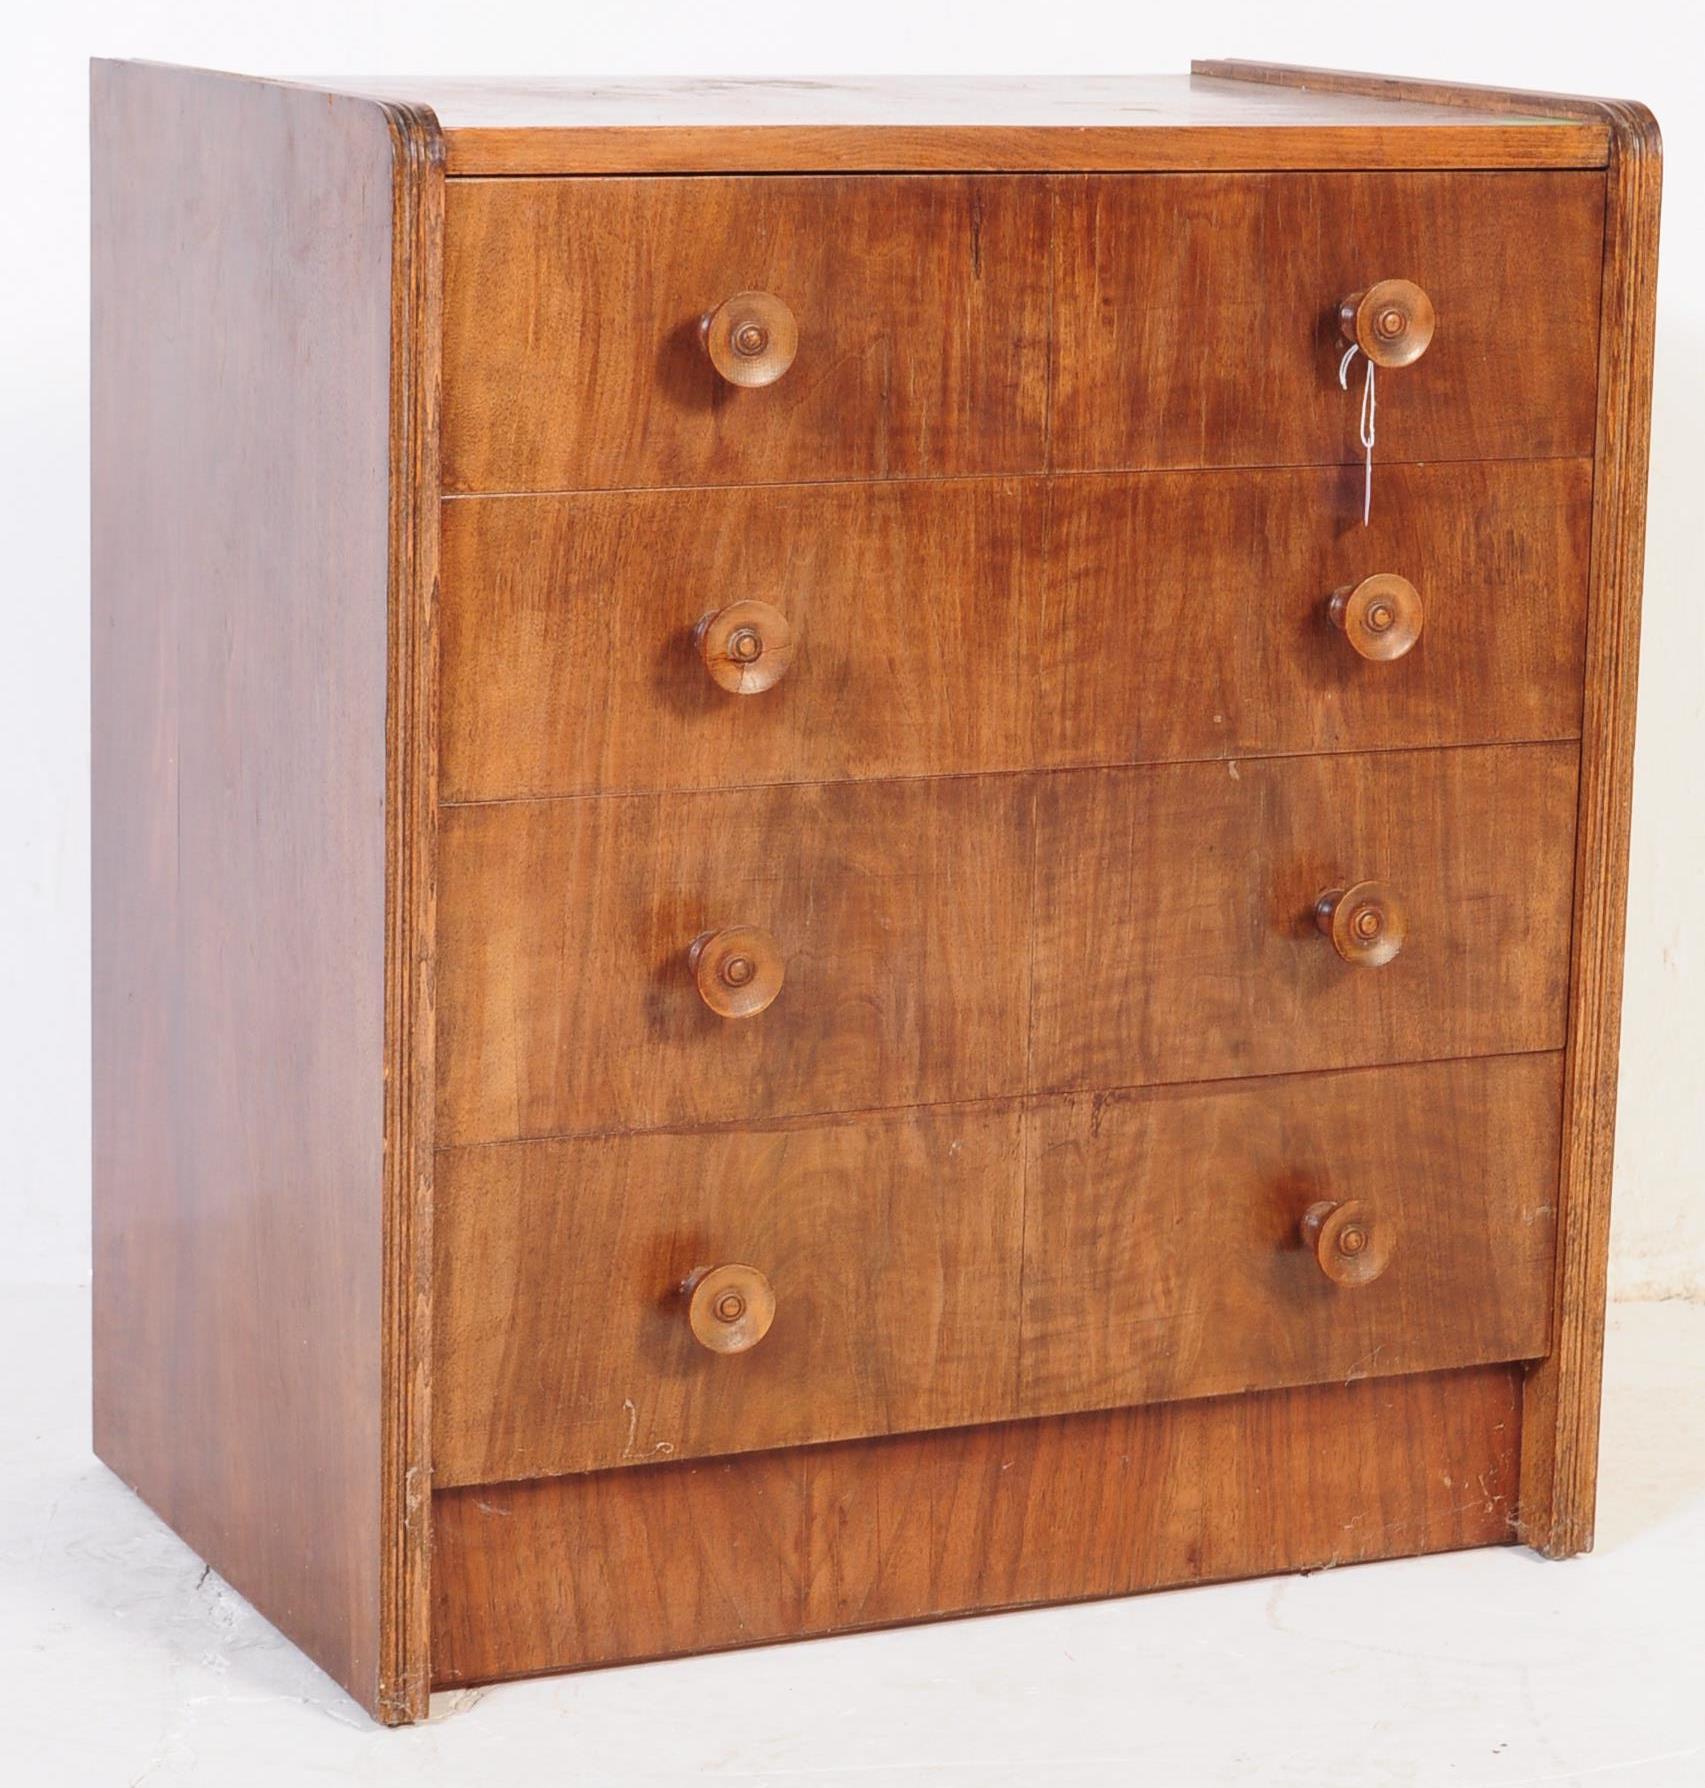 1930S ART DECO BACHELORS CHEST OF DRAWERS